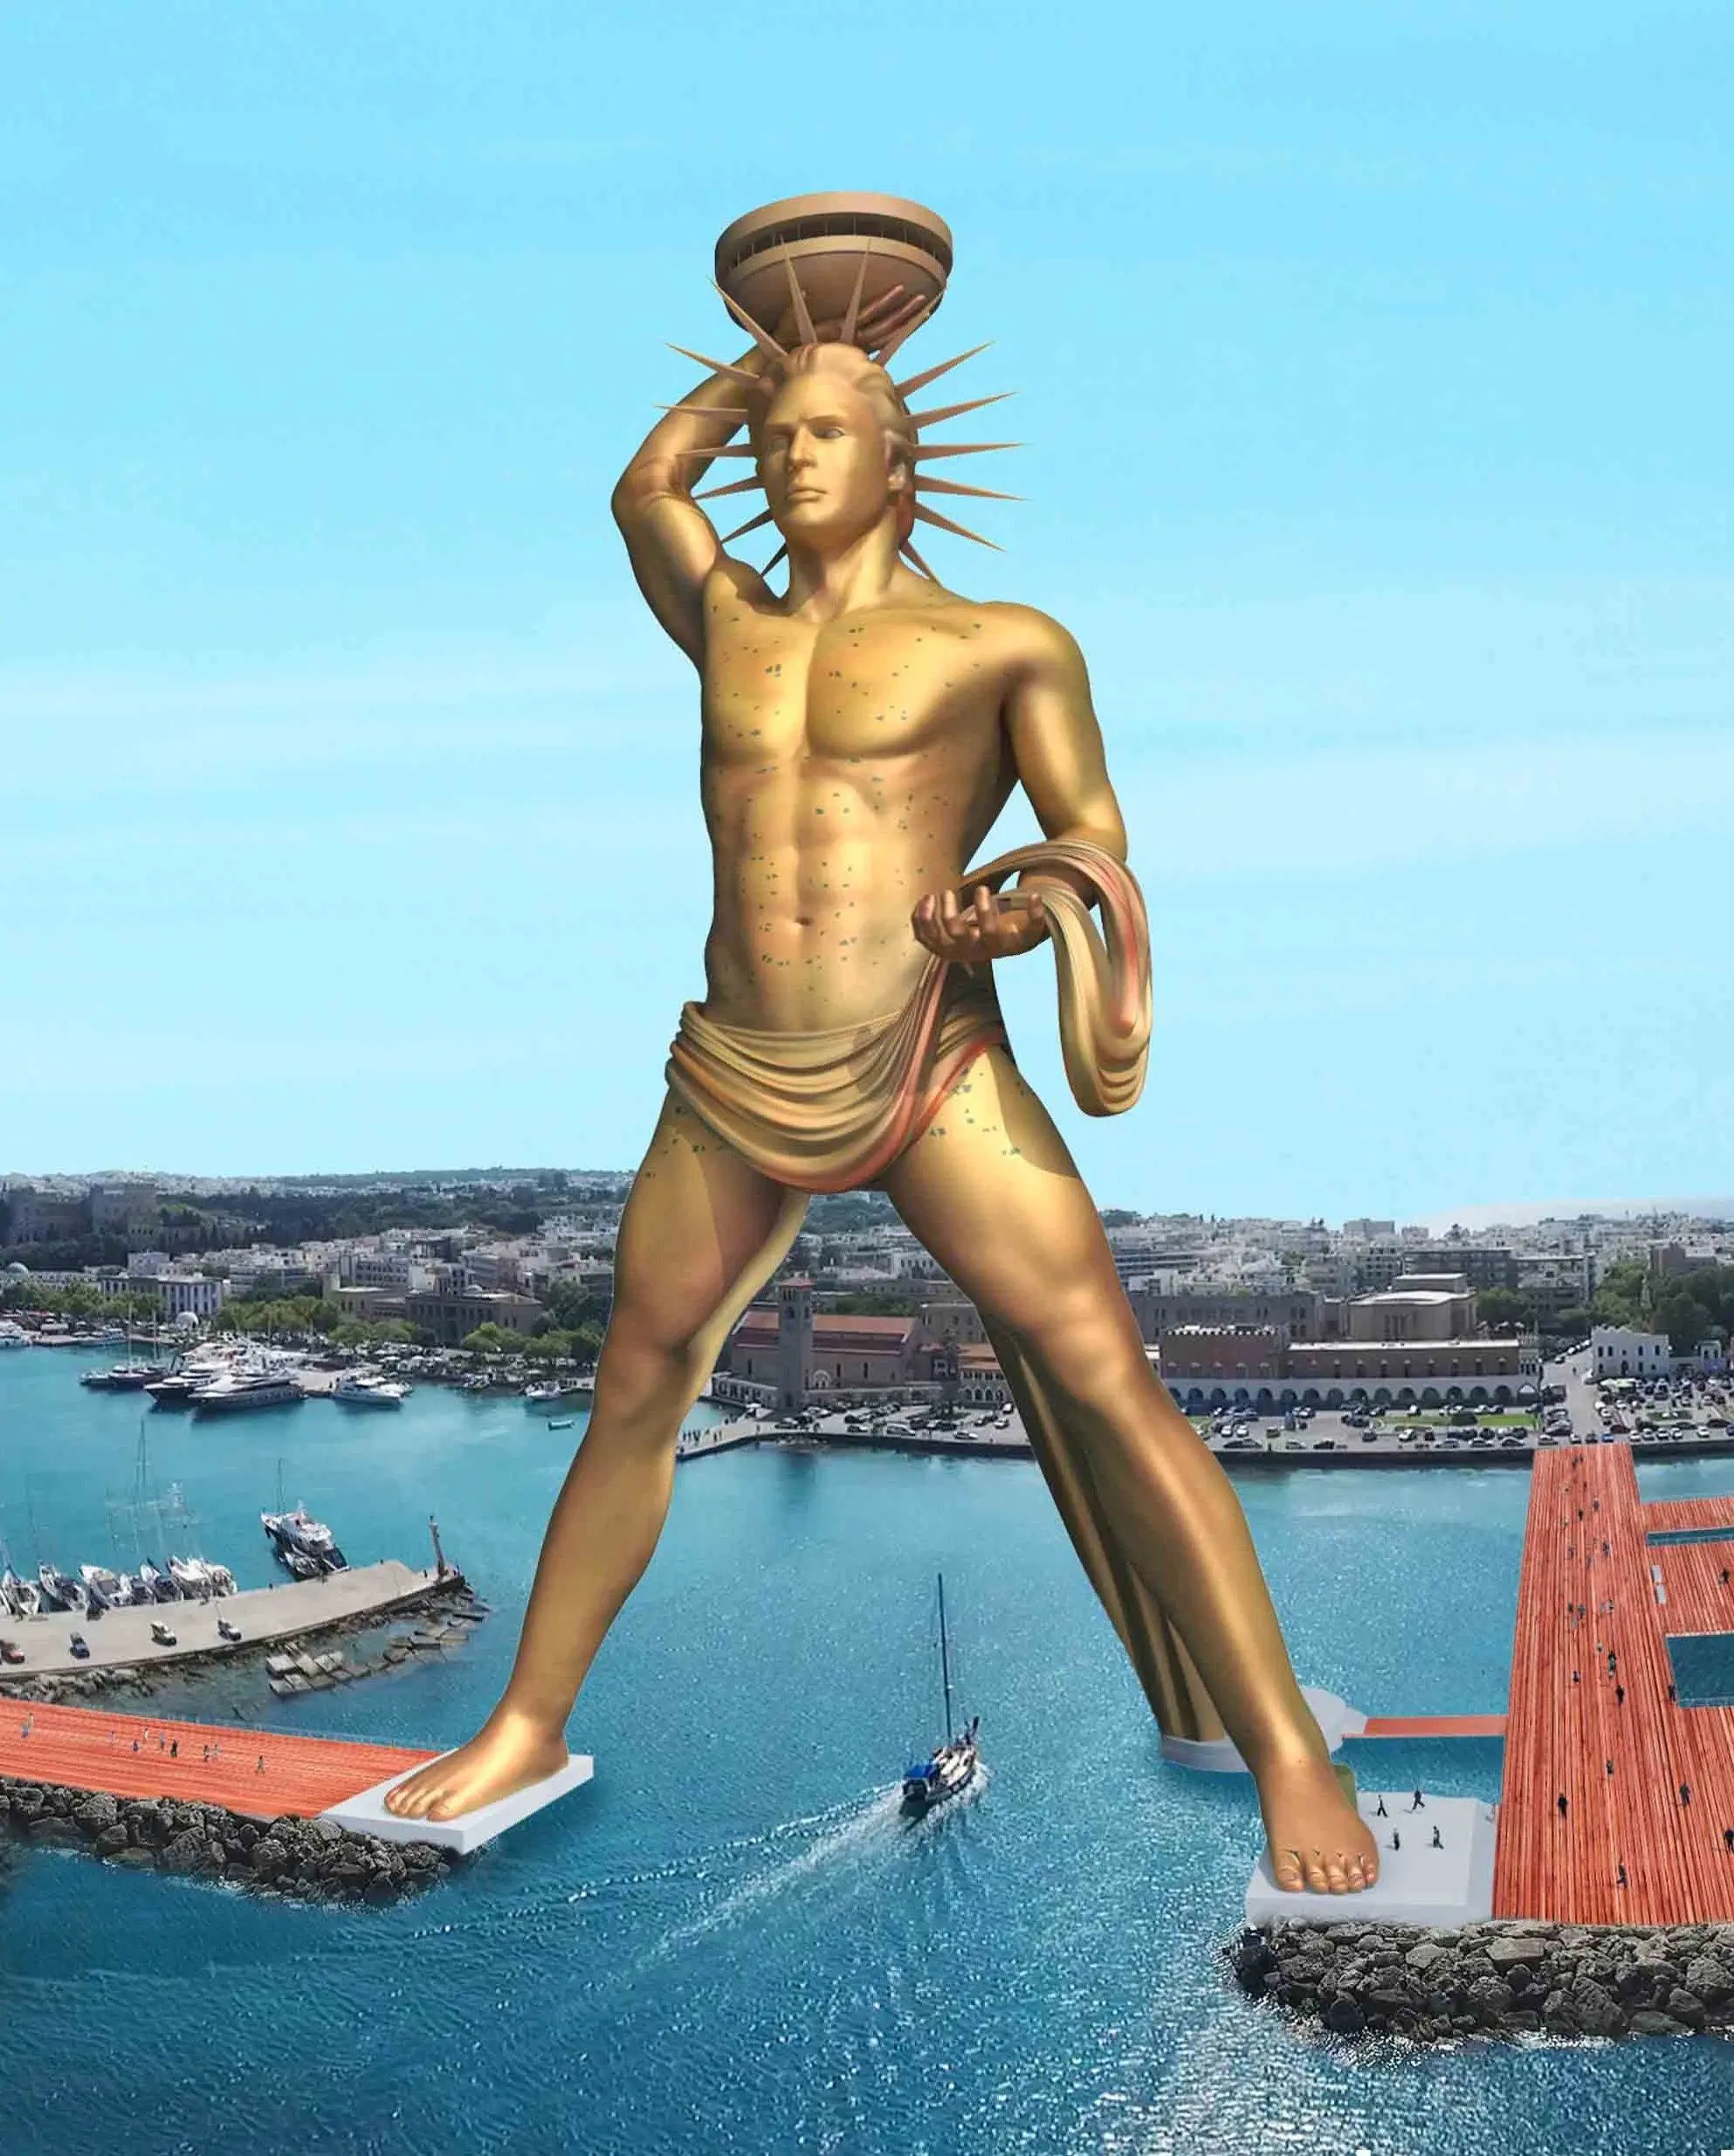 There have been talks about the rebuilding of Colossus of Rhodes